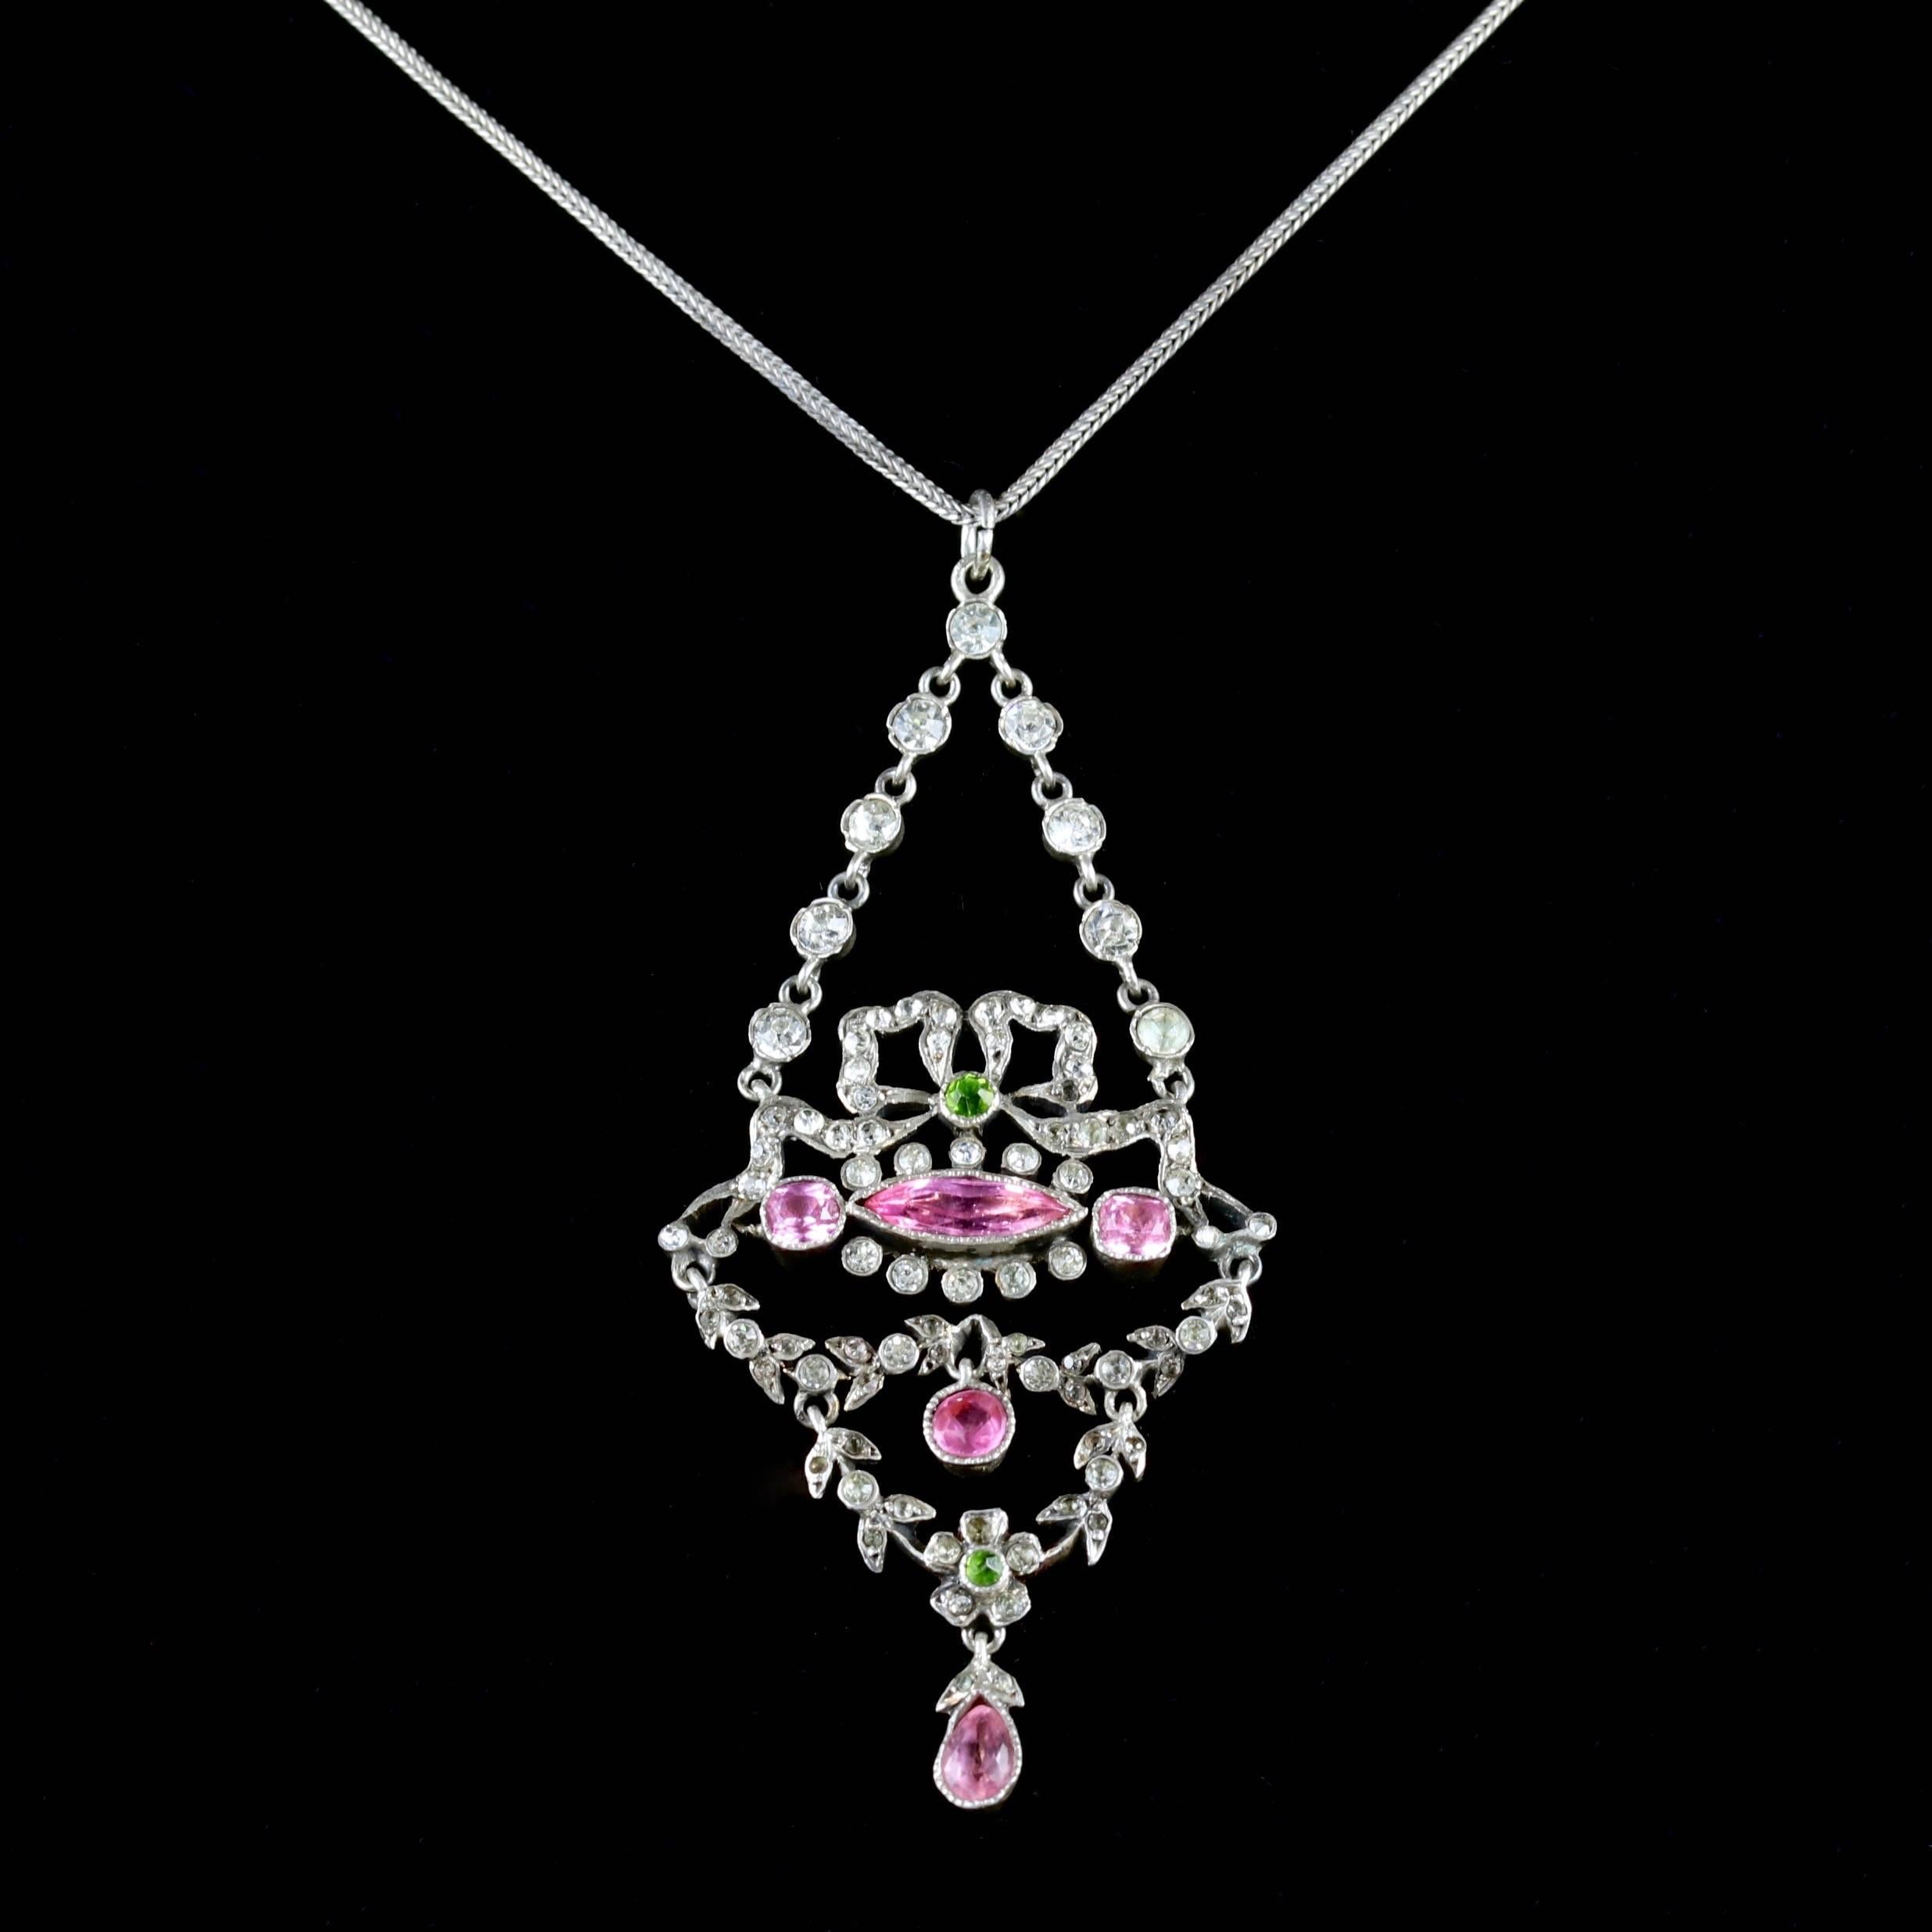 This fabulous Suffragette Victorian pendant necklace is set in Sterling Silver, Circa 1905.

The pendant is adorned in sparkling white, pink and green Paste Stones that represent the Suffragette movement.

Suffragettes liked to be depicted as